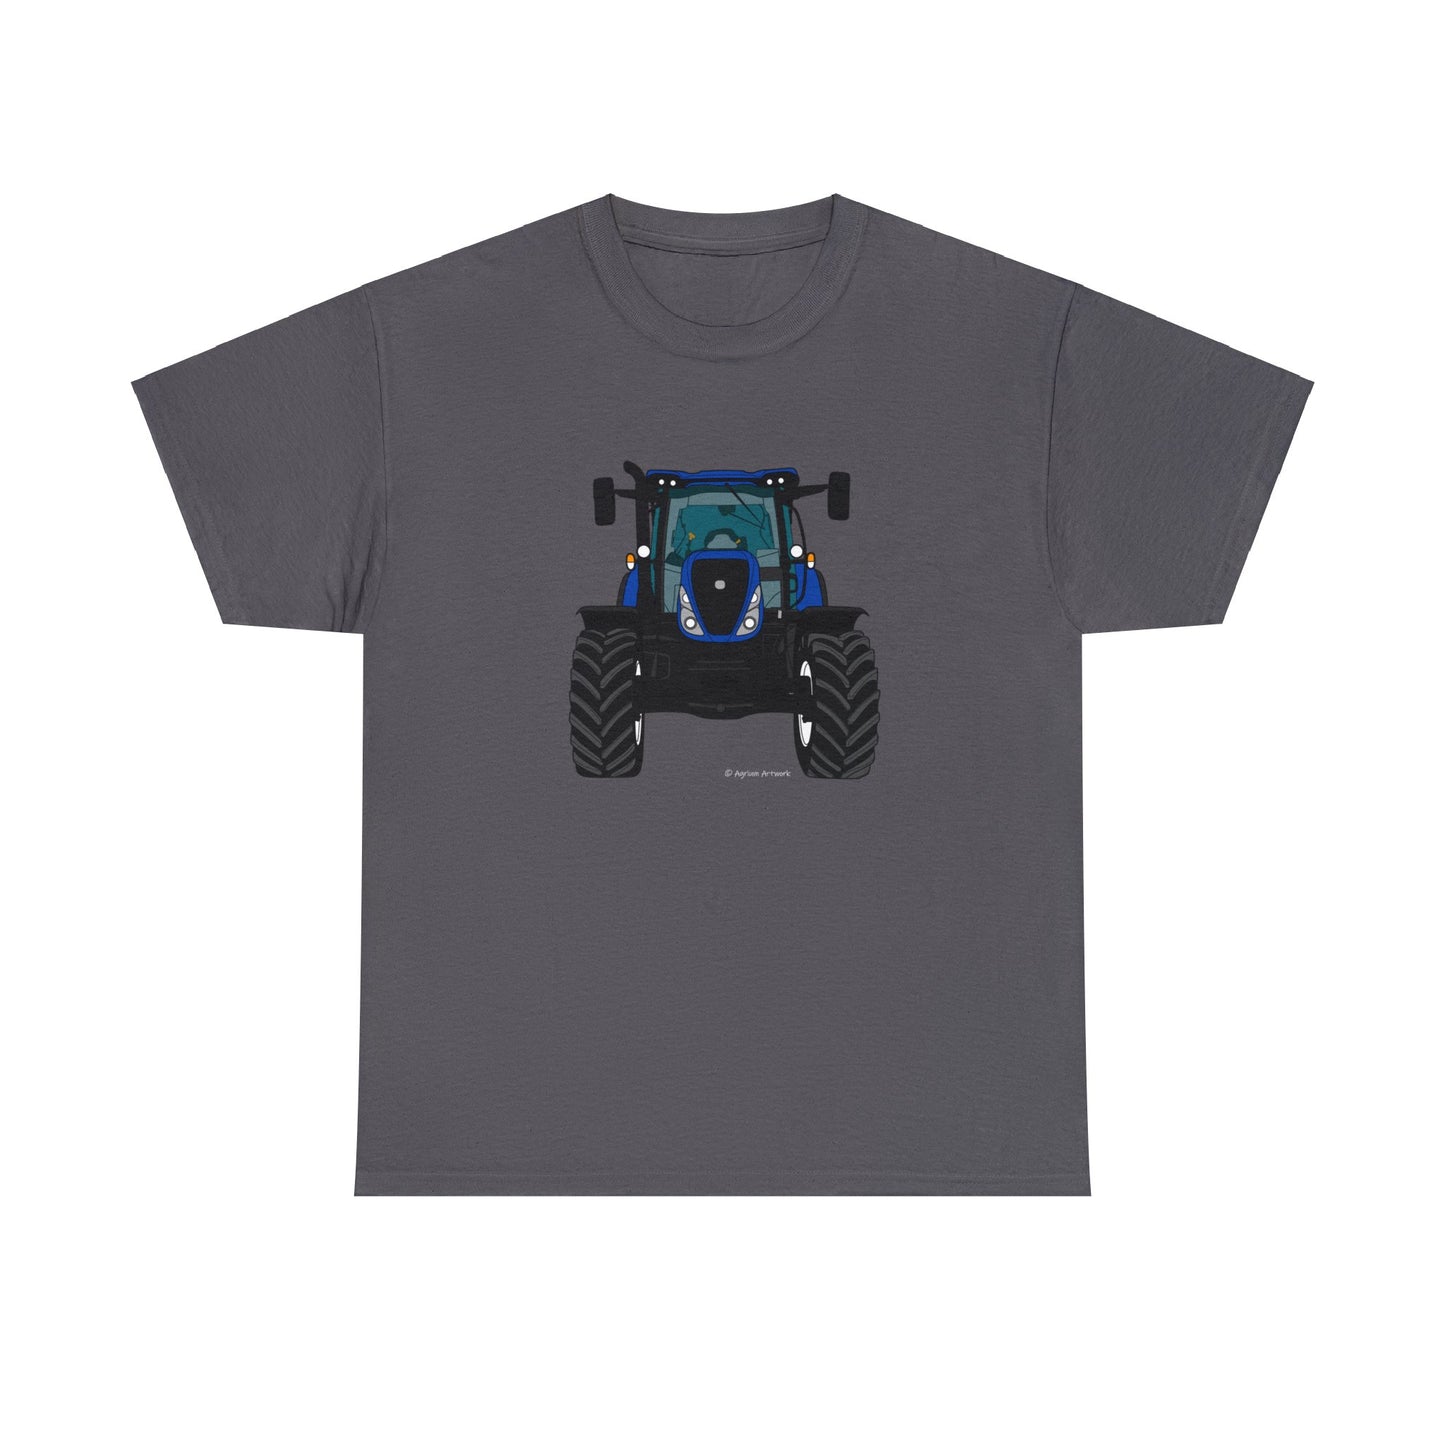 New Holland T7 Tractor - Adult Classic Fit Cartoon T-Shirt